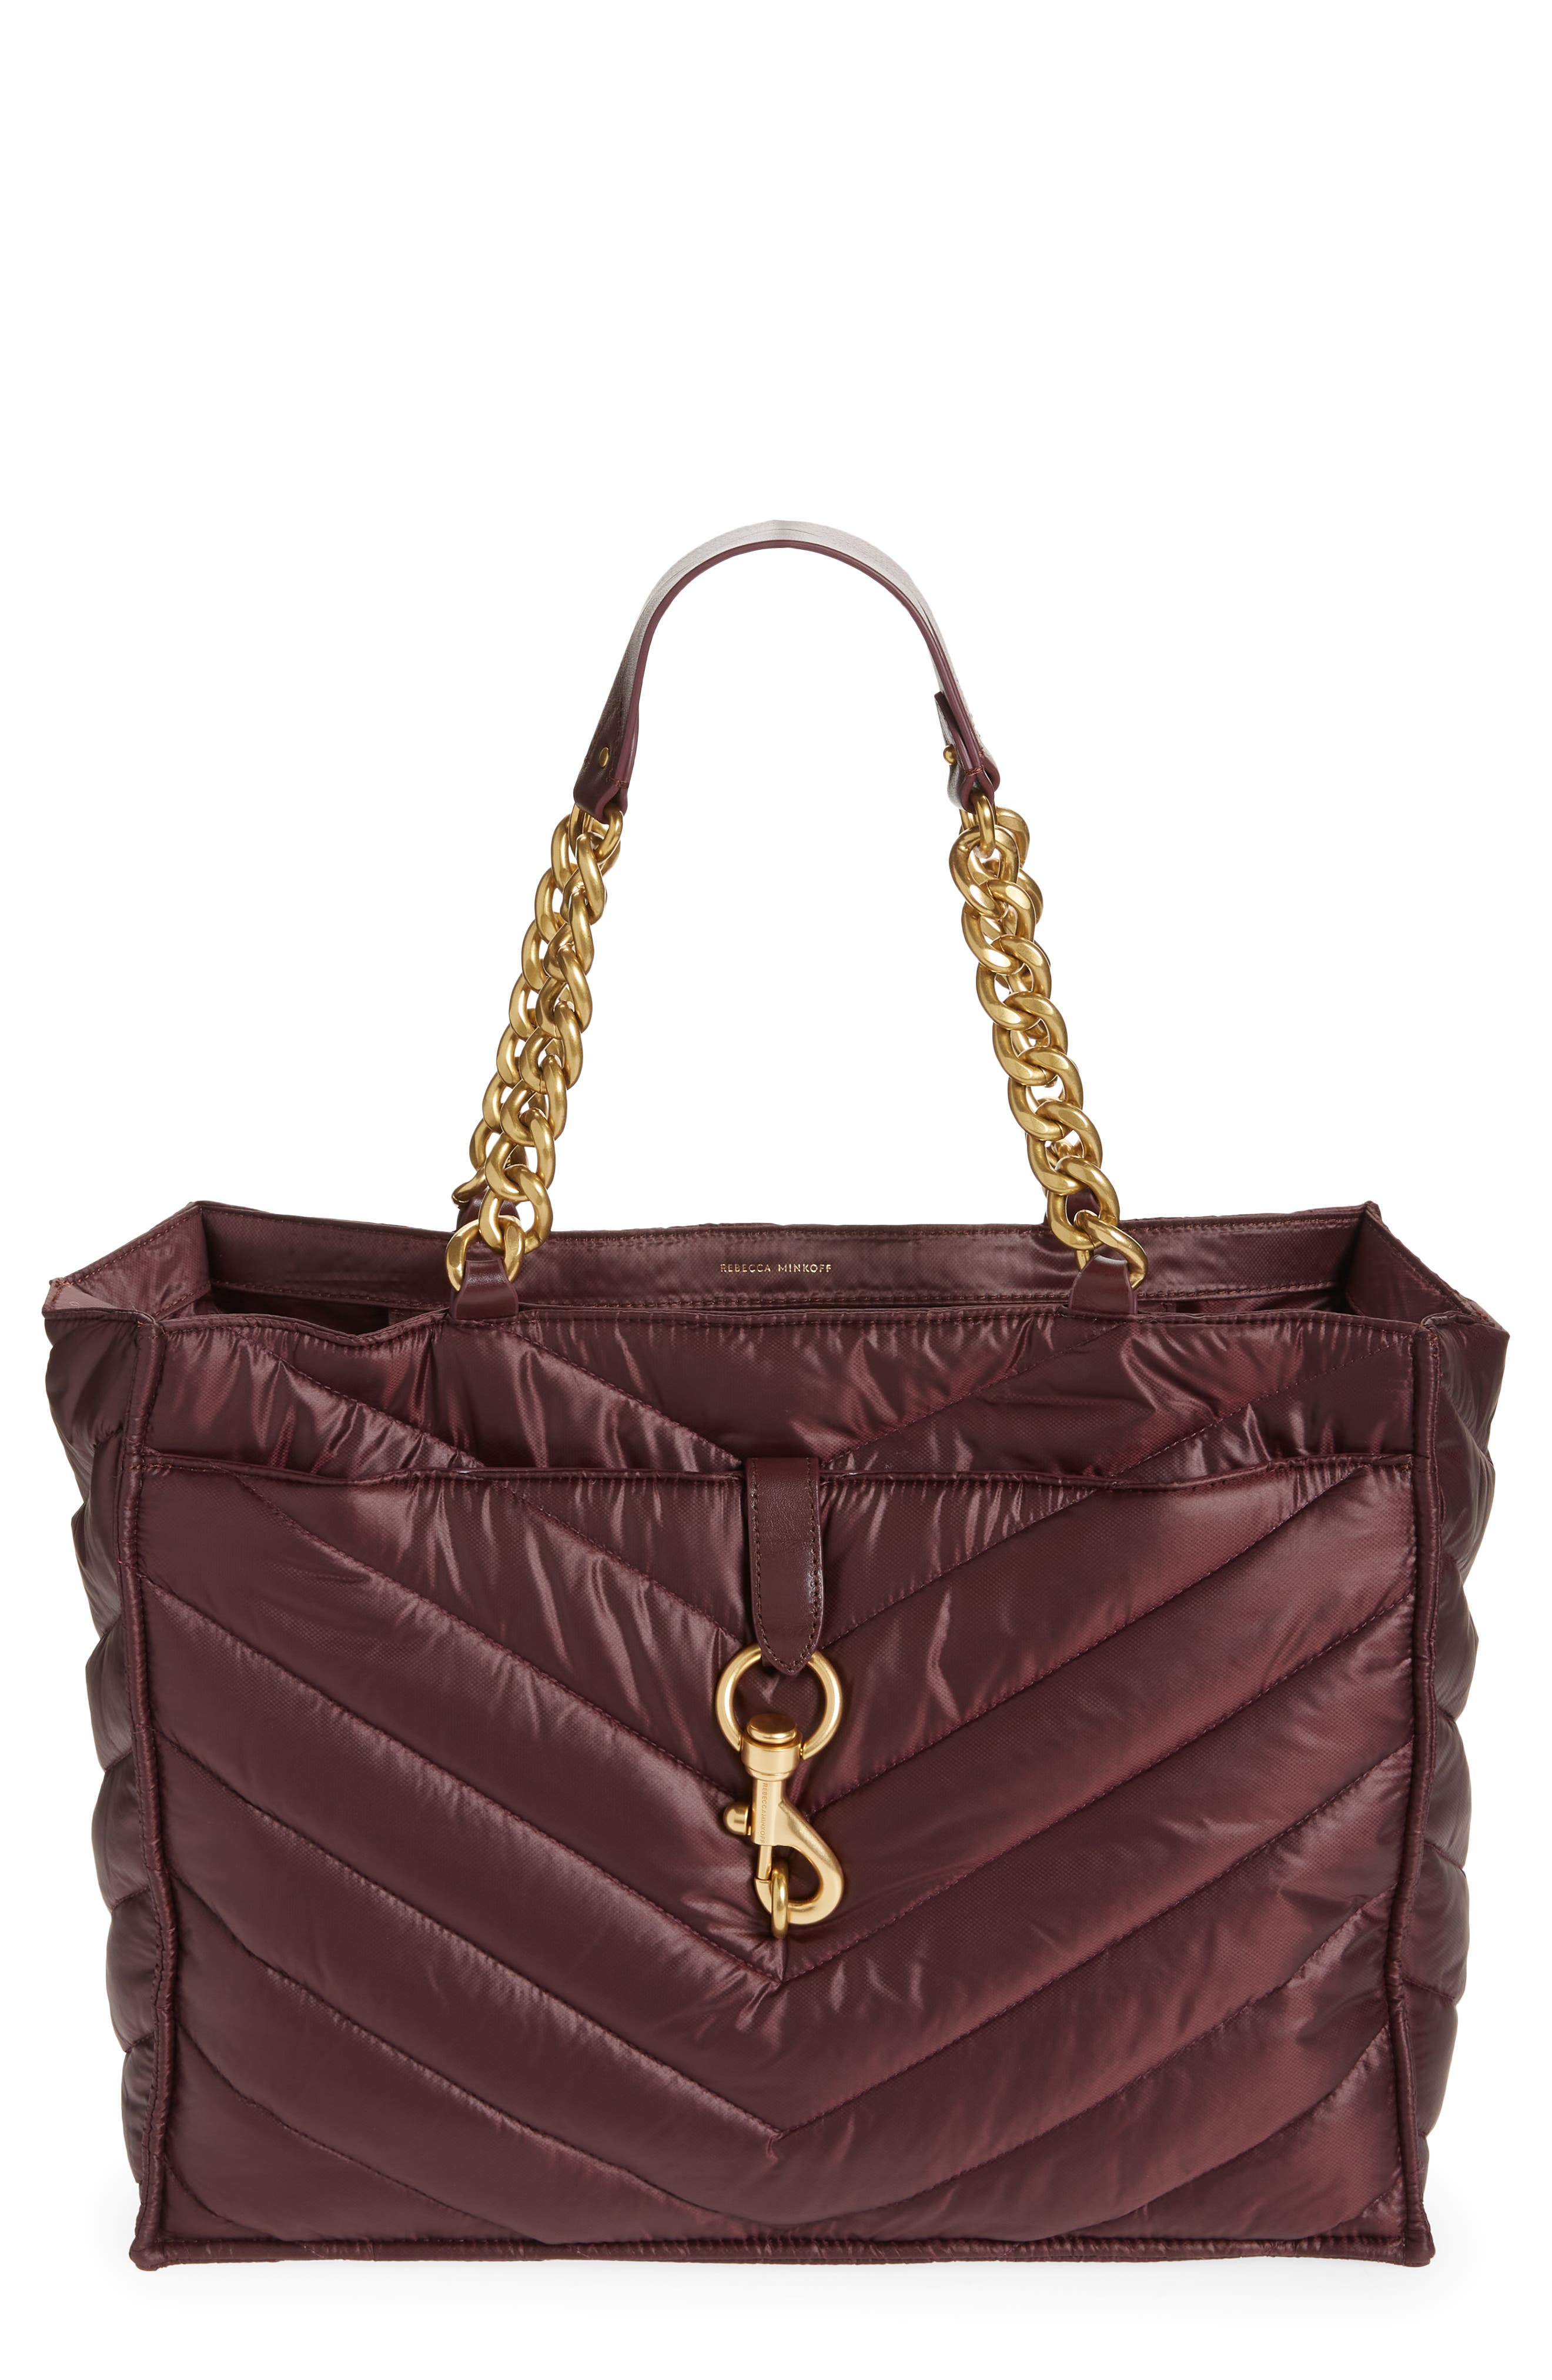 Rebecca Minkoff Edie Quilted Nylon Tote in Malbec at Nordstrom